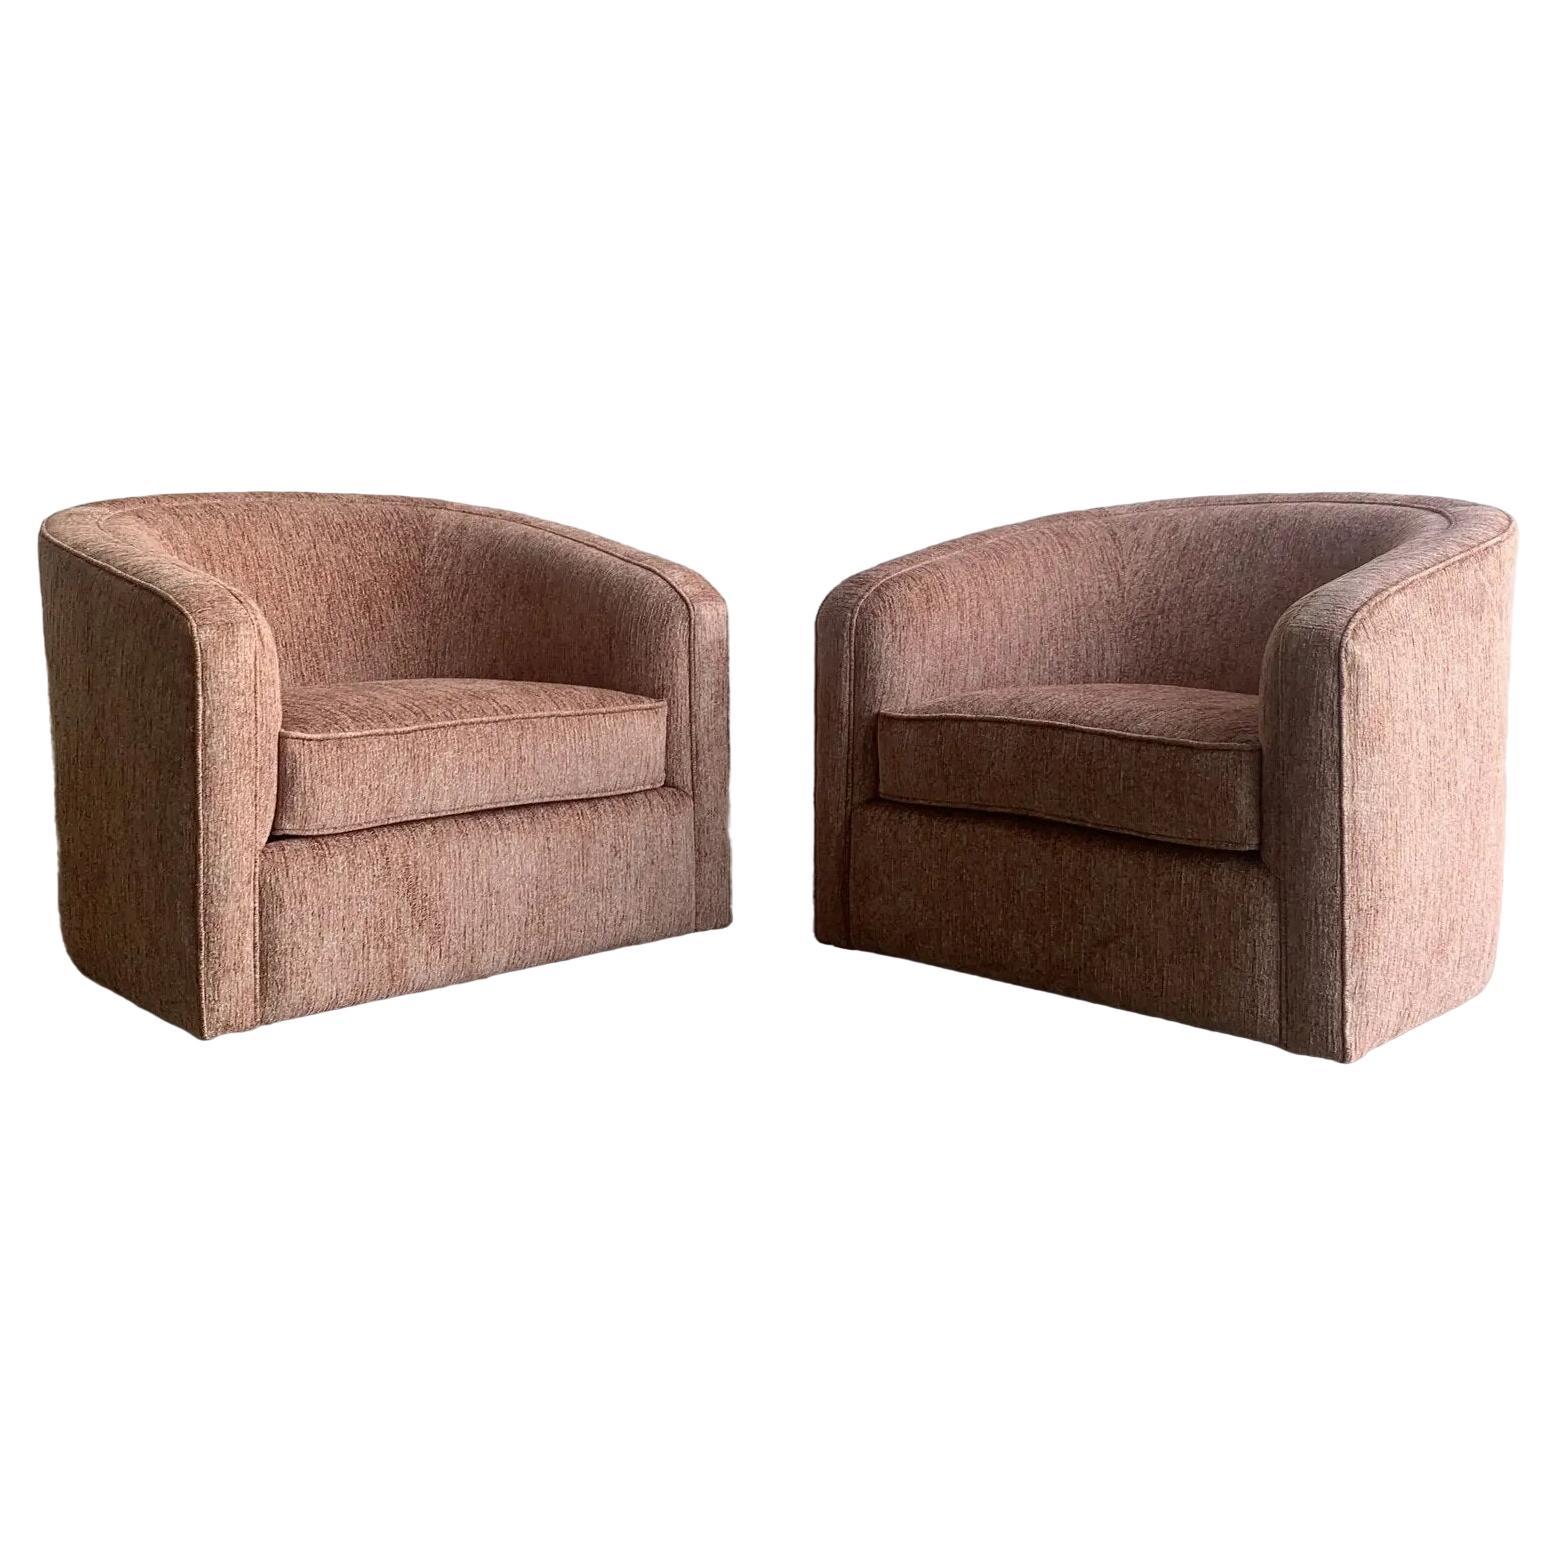 Made to Order Barrel Chairs- Pair